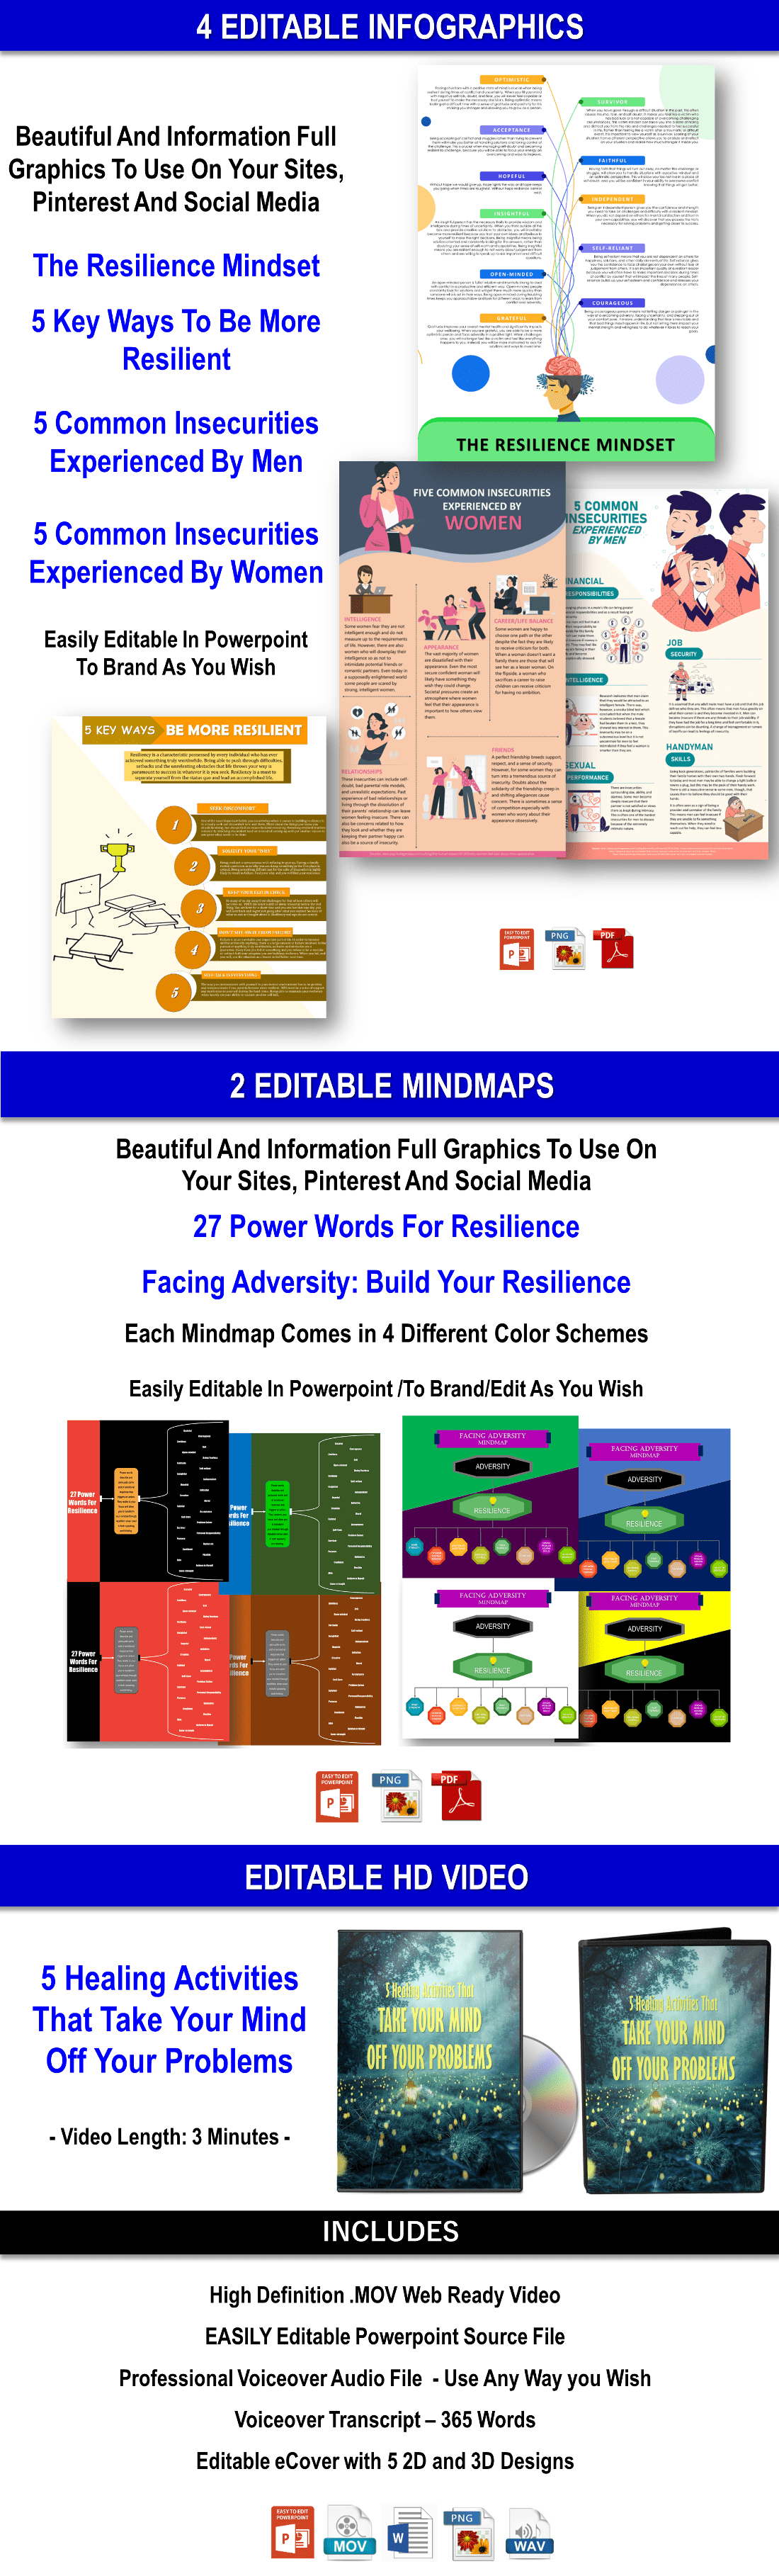 Resilience Is My Superpower: 340 Affirmations And Guided Meditations Giant Content Pack PLR Rights